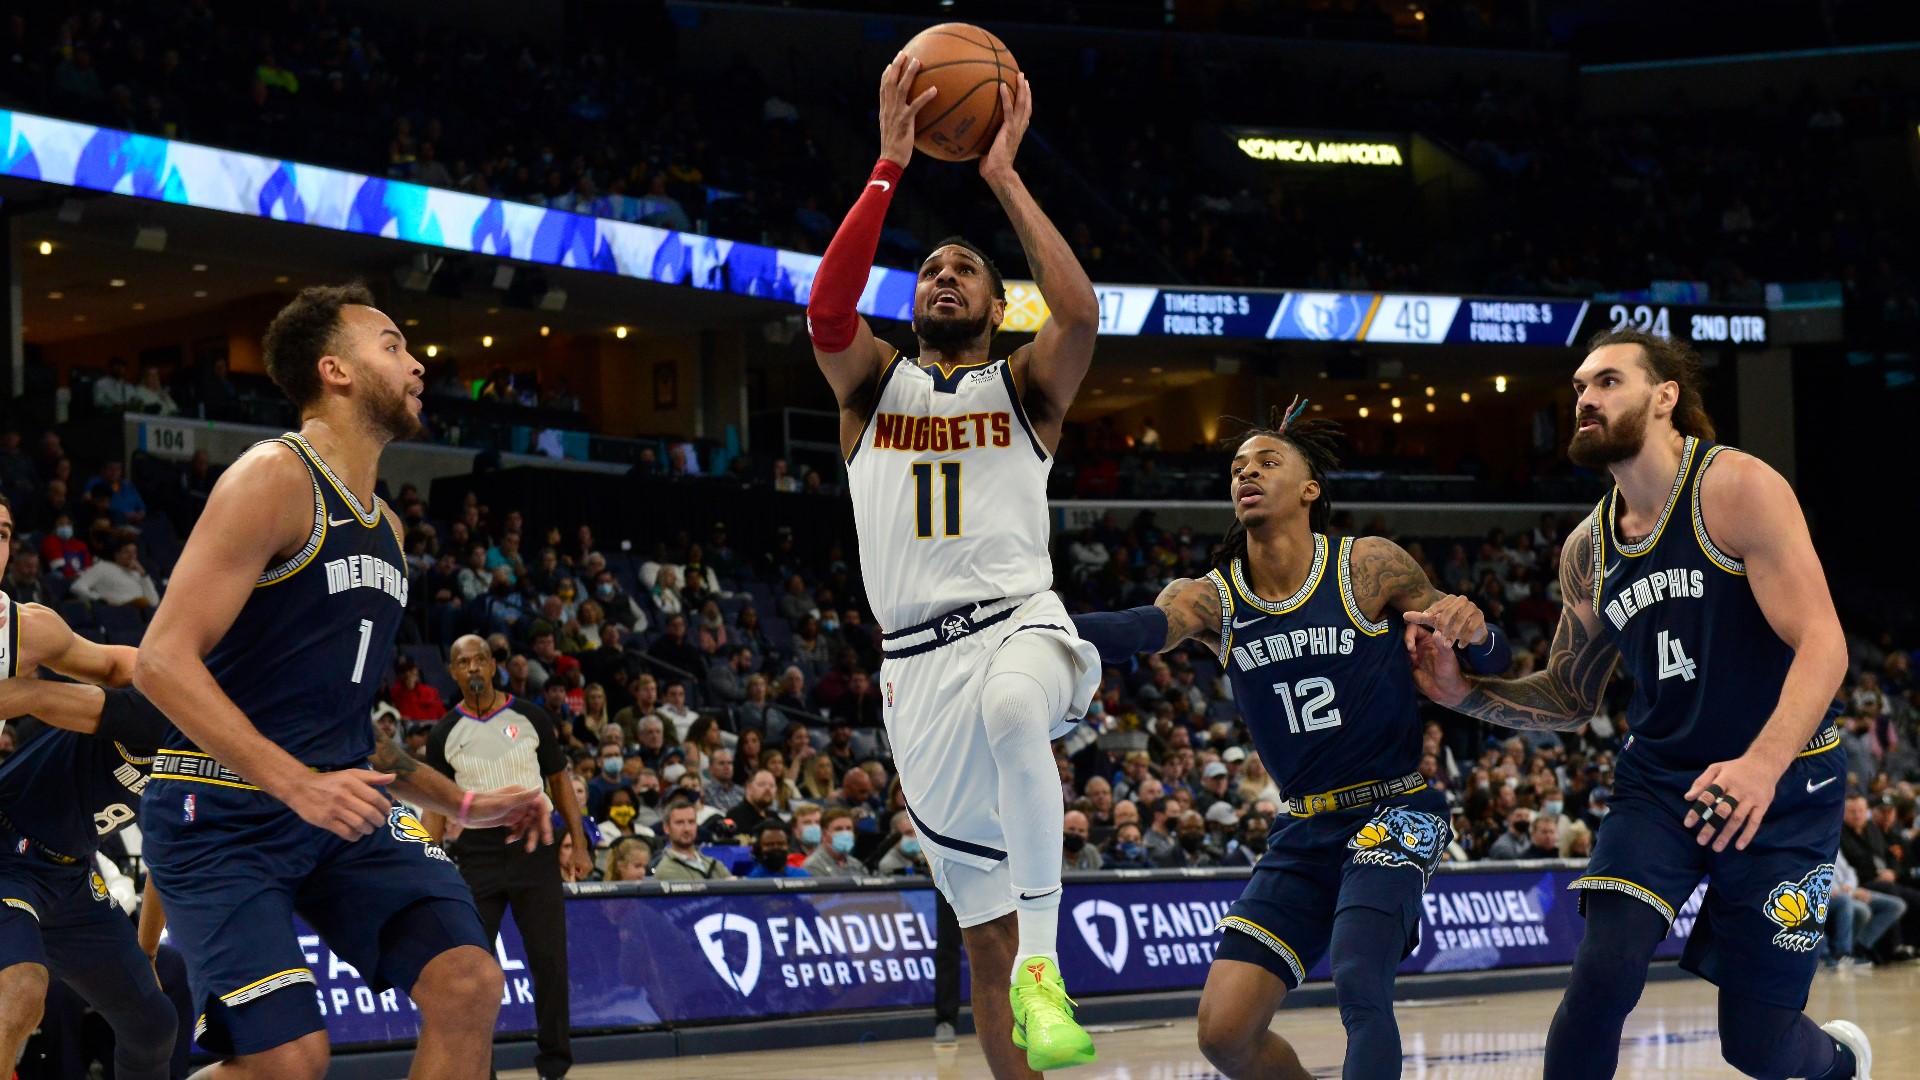 The Denver point guard is looking to be more aggressive with Jamal Murray and Michael Porter Jr. out for the foreseeable future and Will Barton banged up as well.